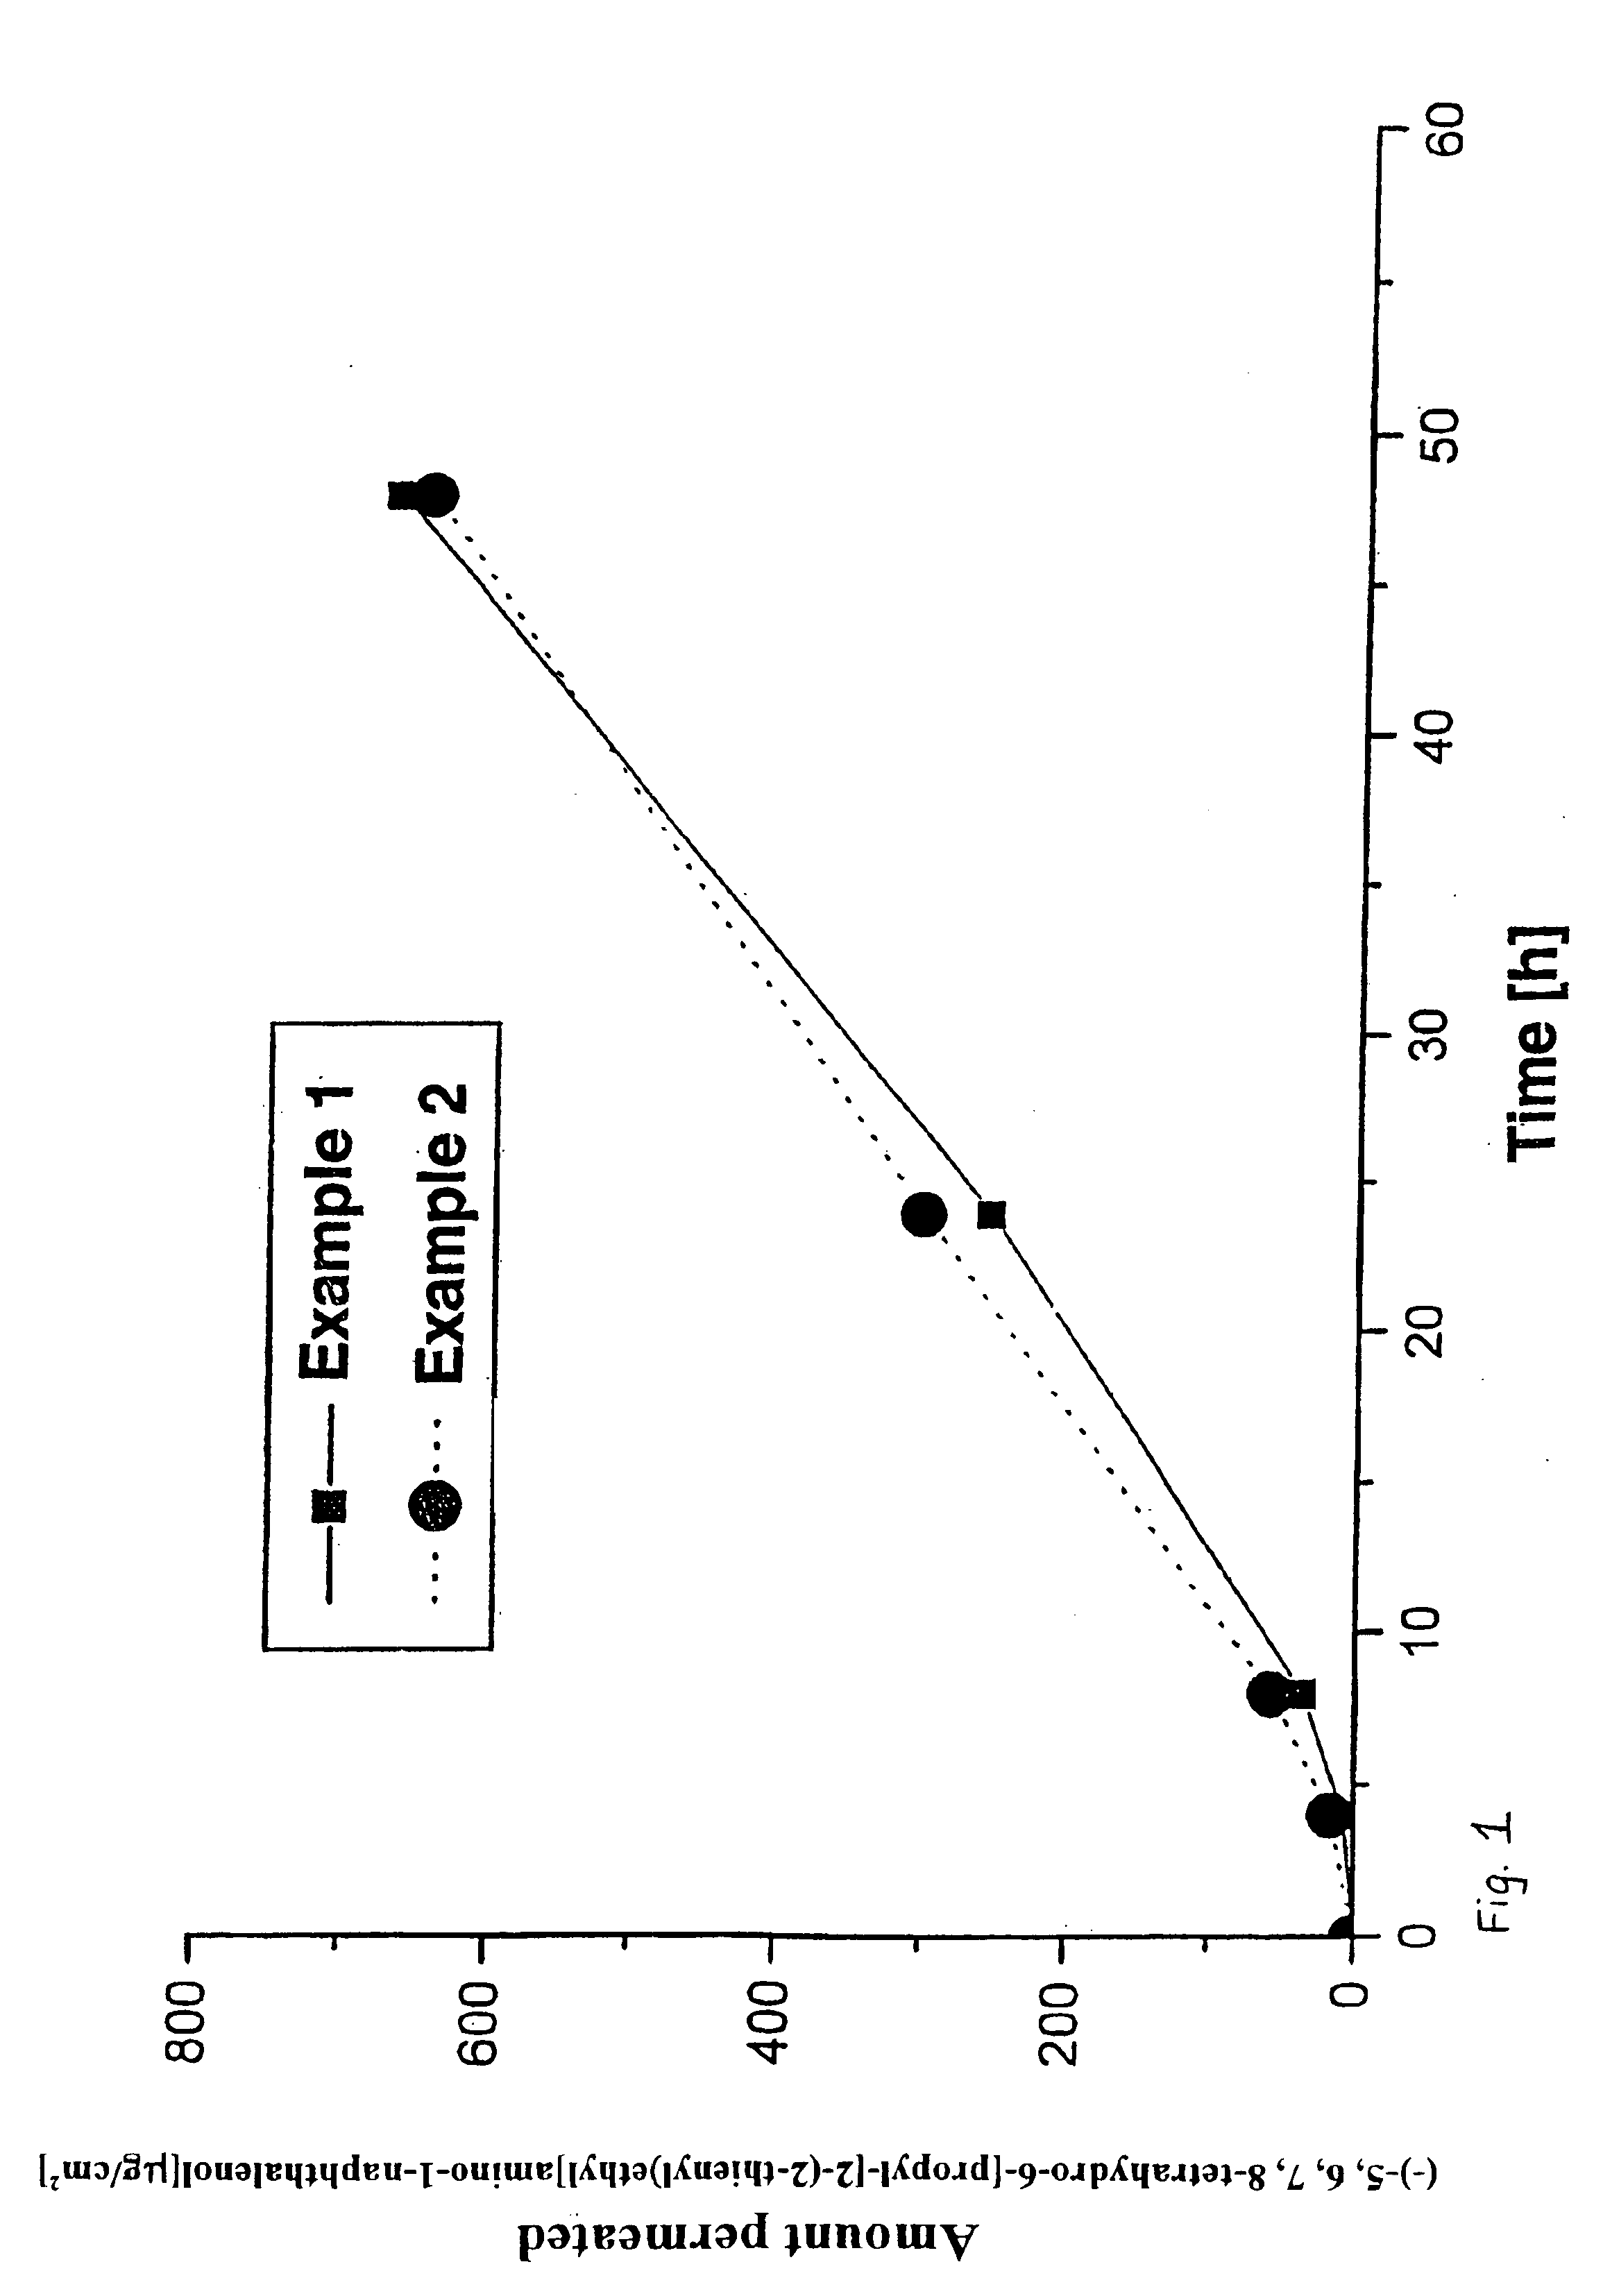 Transdermal therapeutic system which contains a d2 agonist and which is provided for treating parkinsonism, and a method for the production thereof